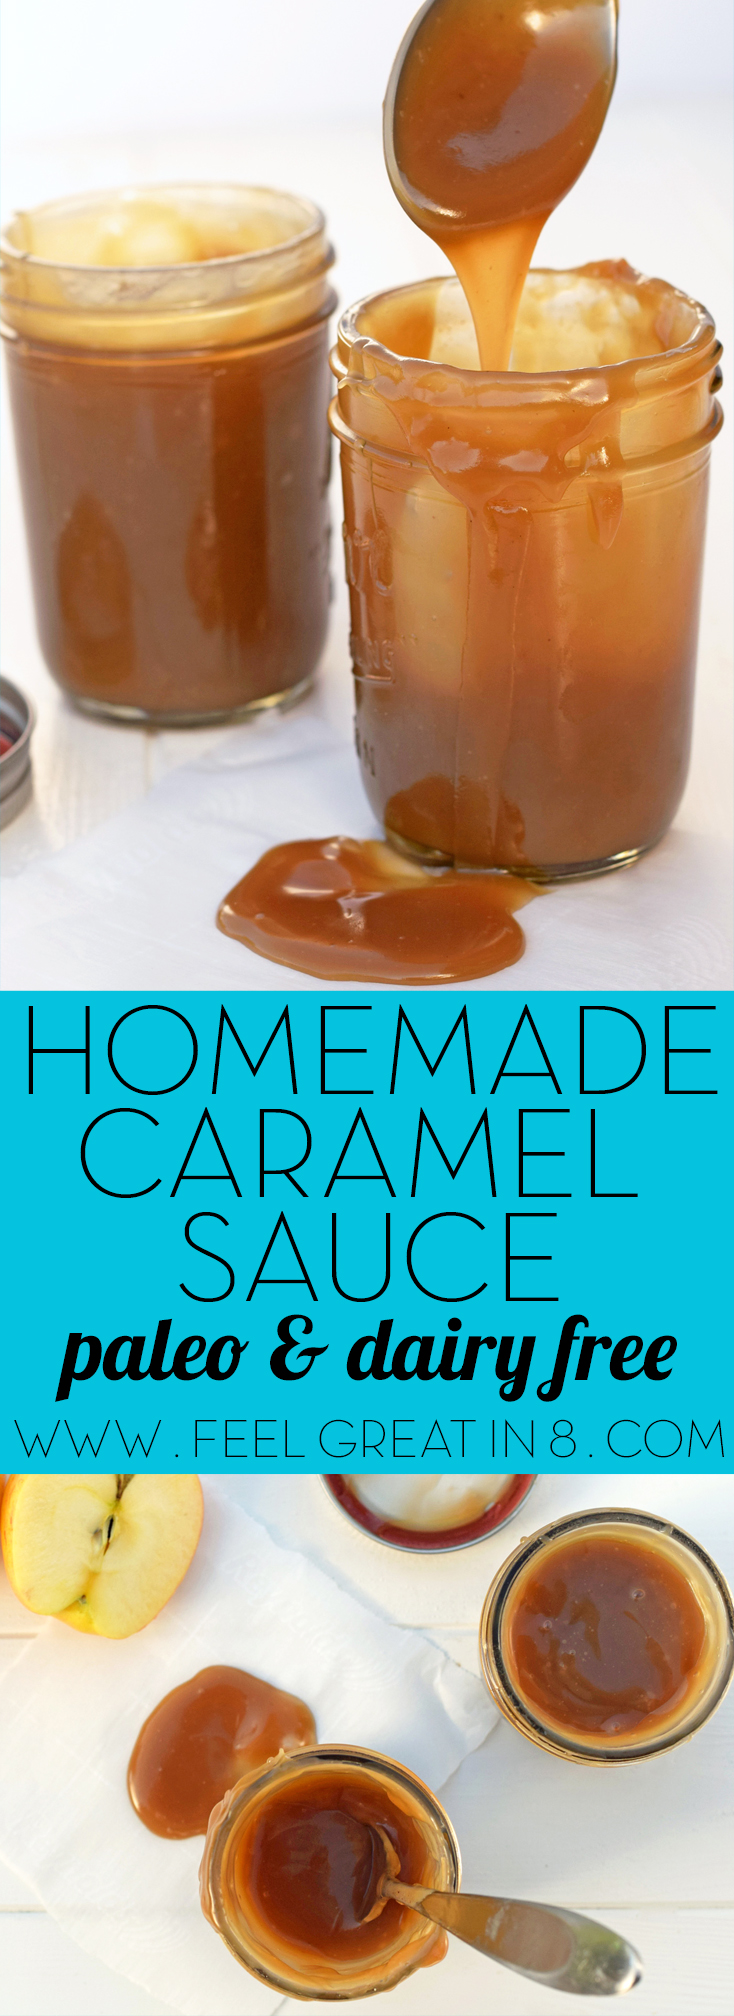 Homemade Caramel Sauce - You'd never guess this easy to make, gooey, sweet caramel sauce is paleo, dairy-free, and refined sugar free! | Feel Great in 8